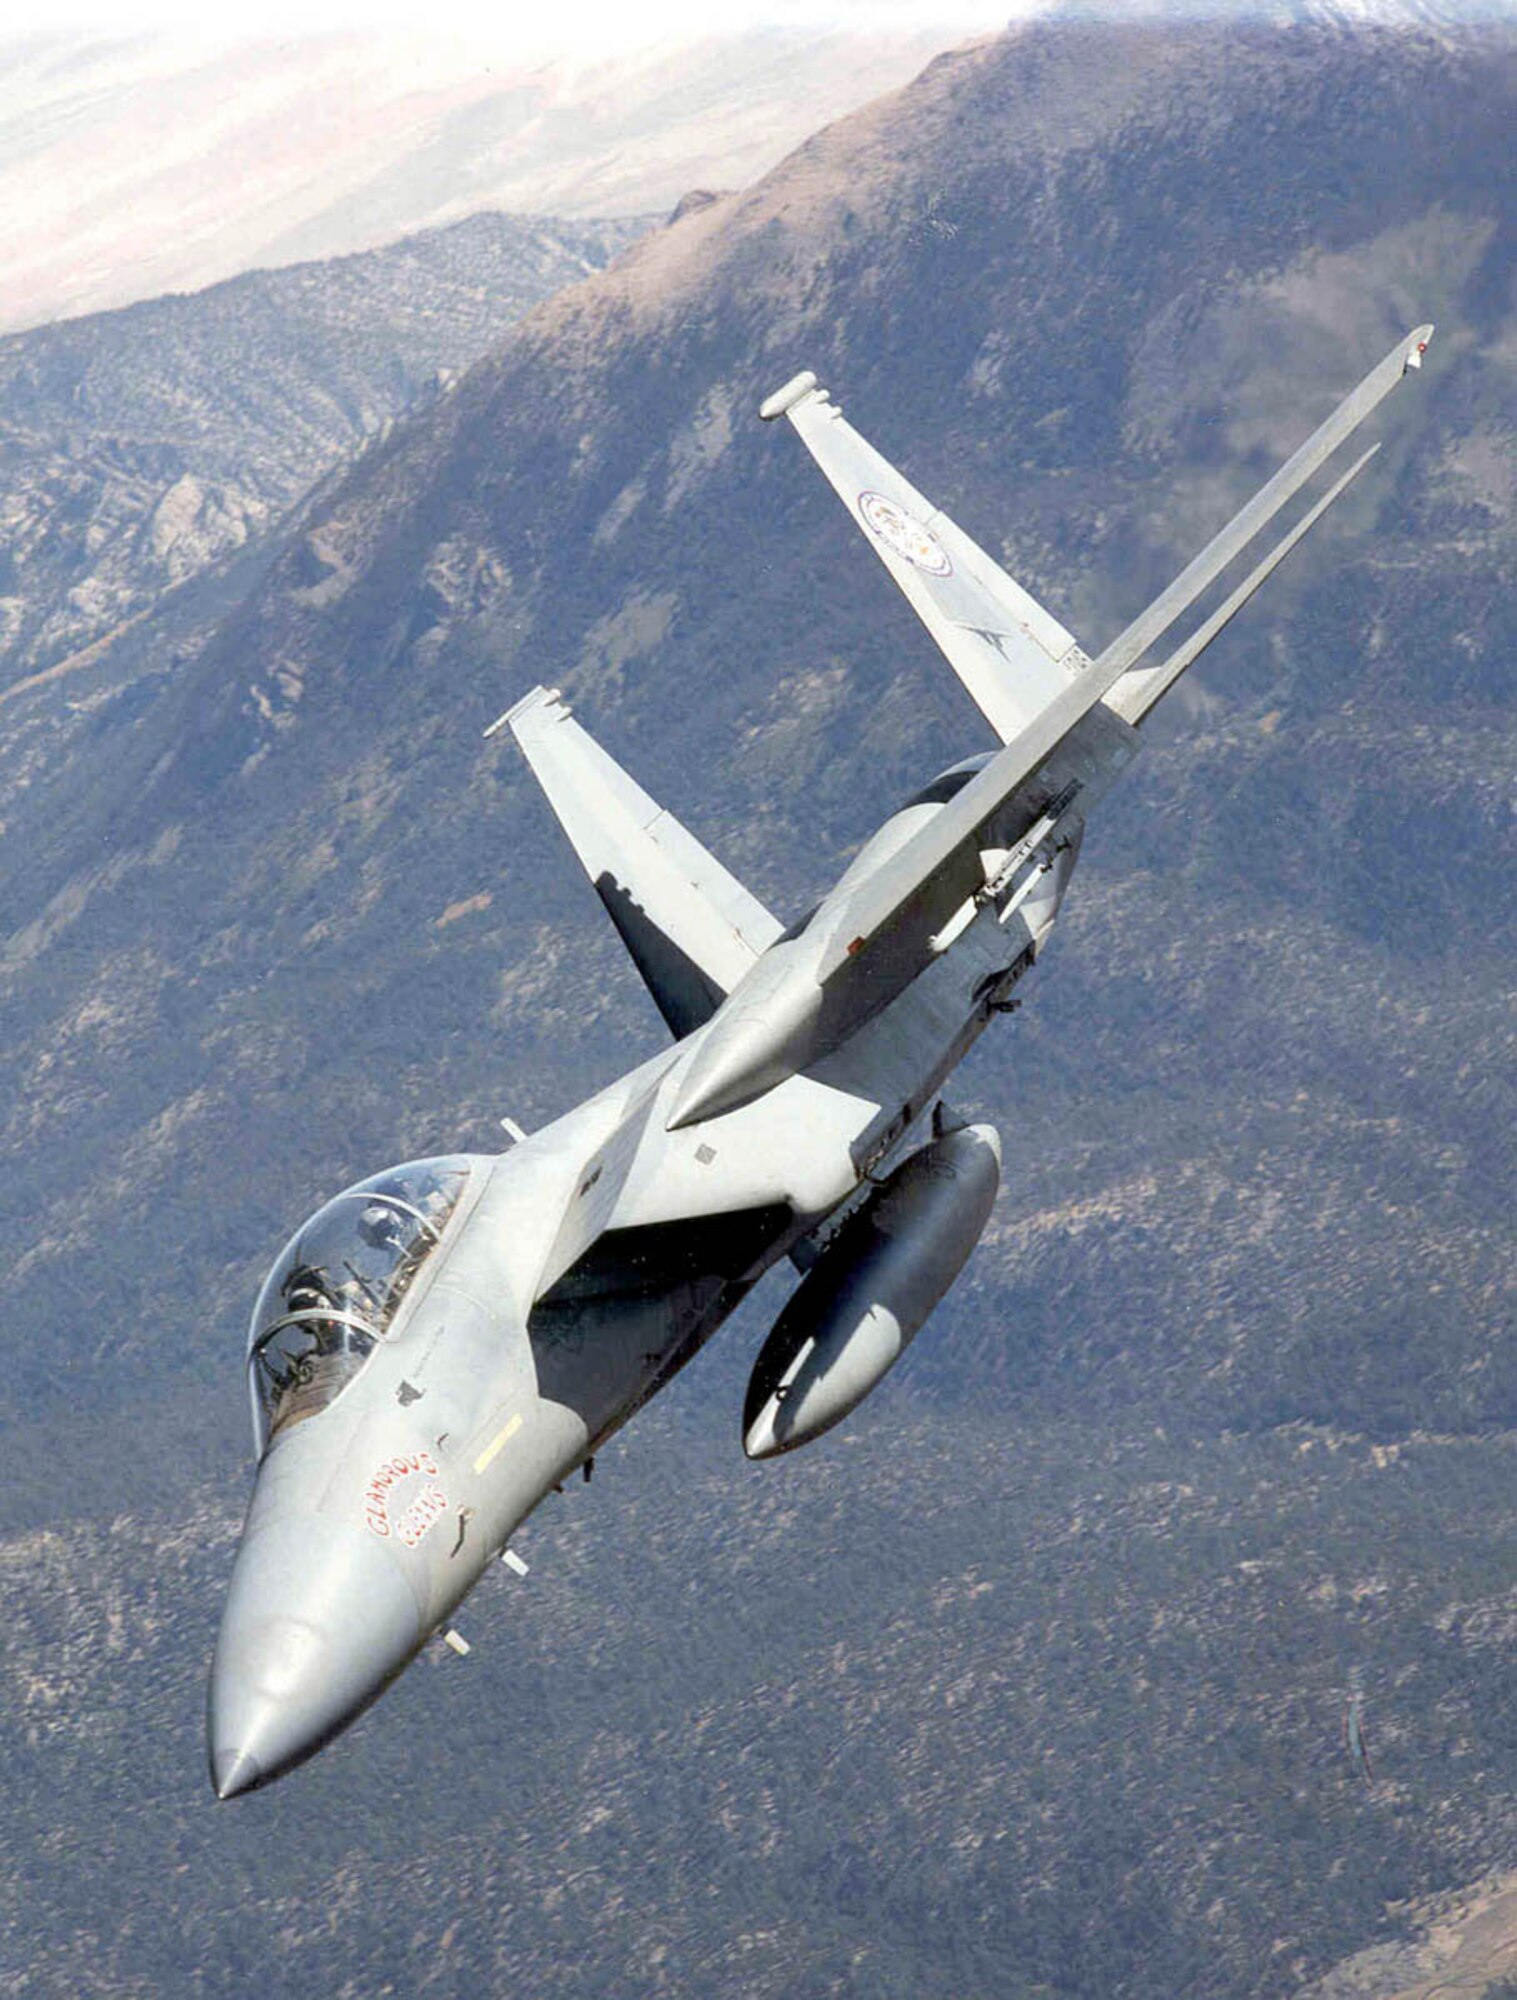 EDWARDS AIR FORCE BASE, Calif. -- An F-15 Eagle from the 445th Flight Test Squadron here banks over mountains in the Sequoia National Forest. The F-15 was flying as a chase aircraft during recent B-1B bomber tests. Throughout the years, Edwards has evaluated the world's current premier air superiority fighter for engine enhancements, radar improvements and weapons additions.(U.S. Air Force photo by George Rolhmaller)